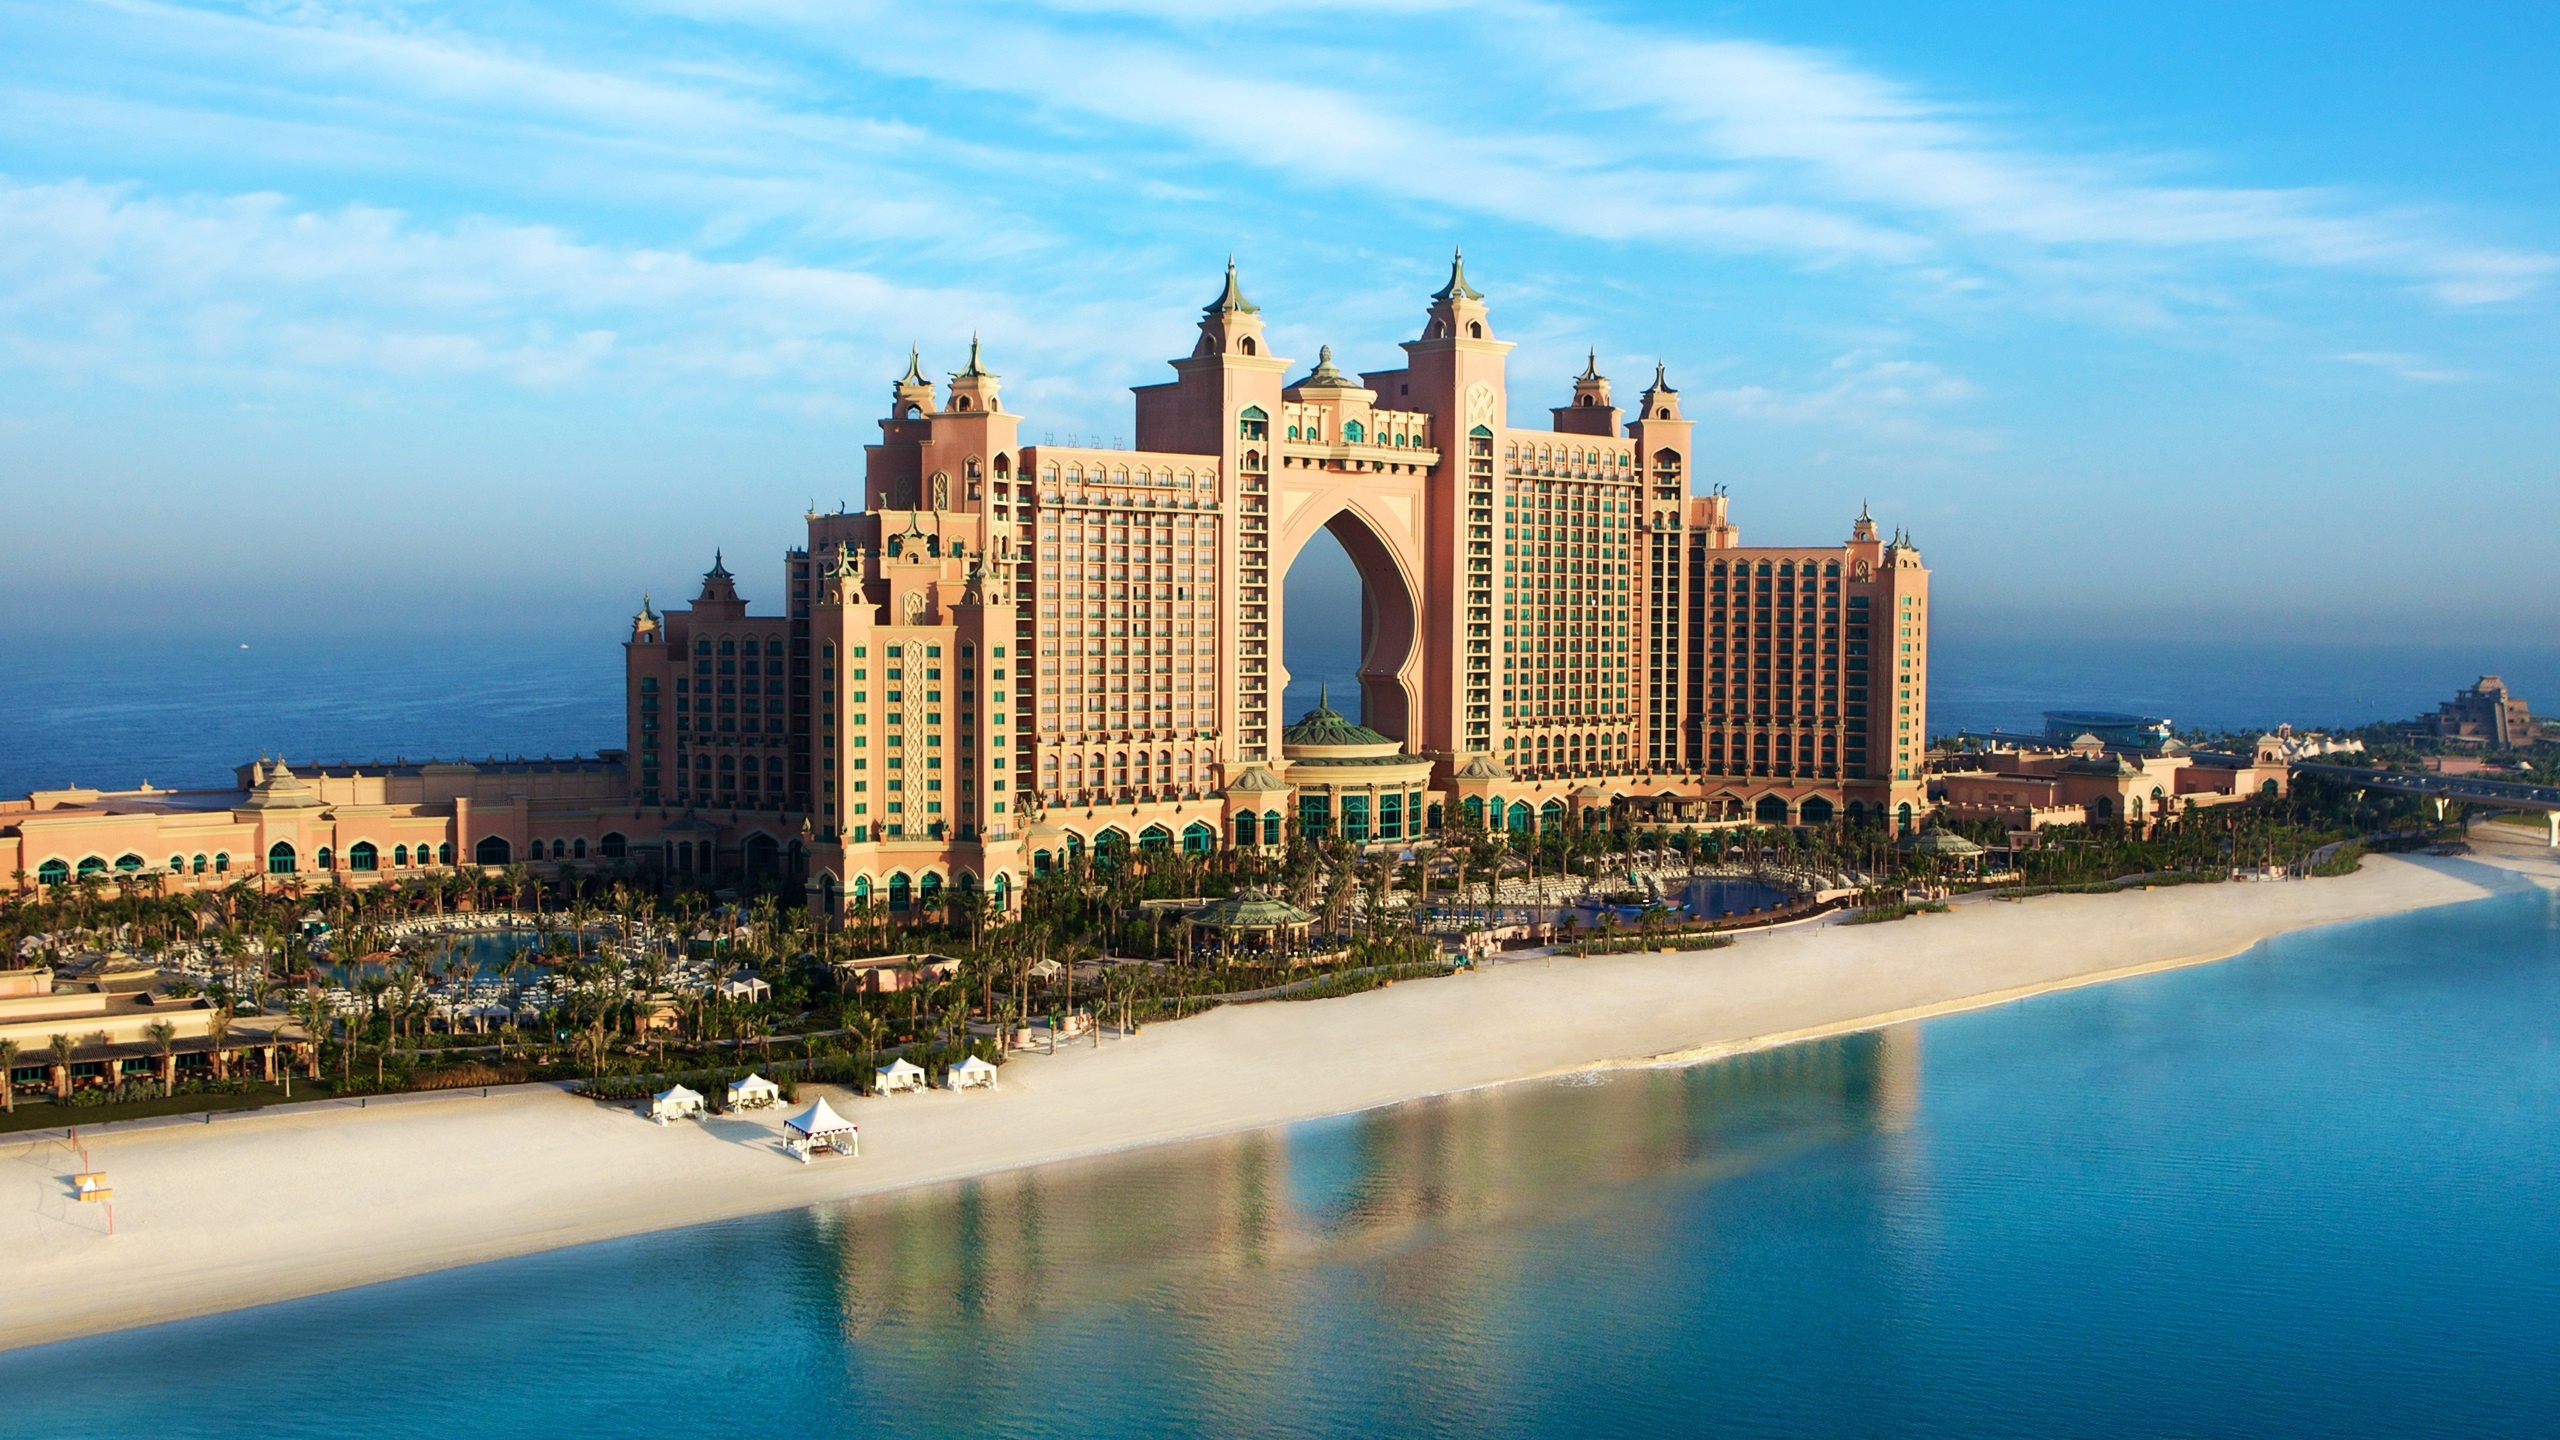 Atlantis The Palm Dubai Wallpapers in jpg format for free download2560 x 1440